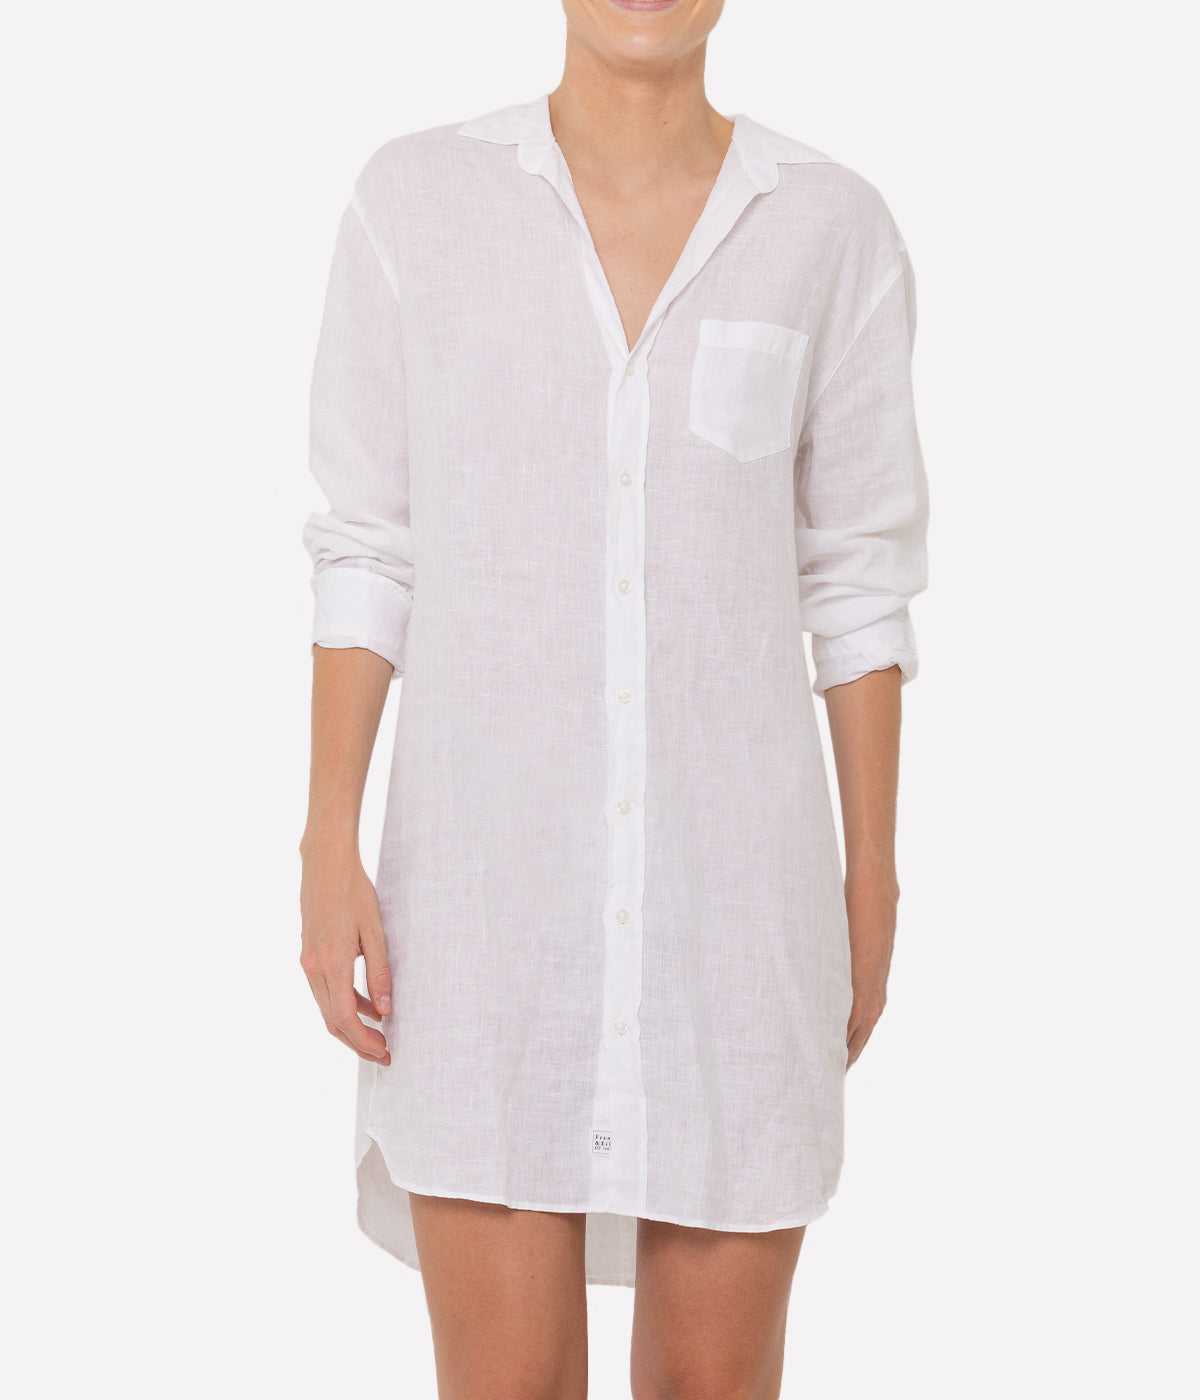 Mary Woven Linen Button Up Dress in White